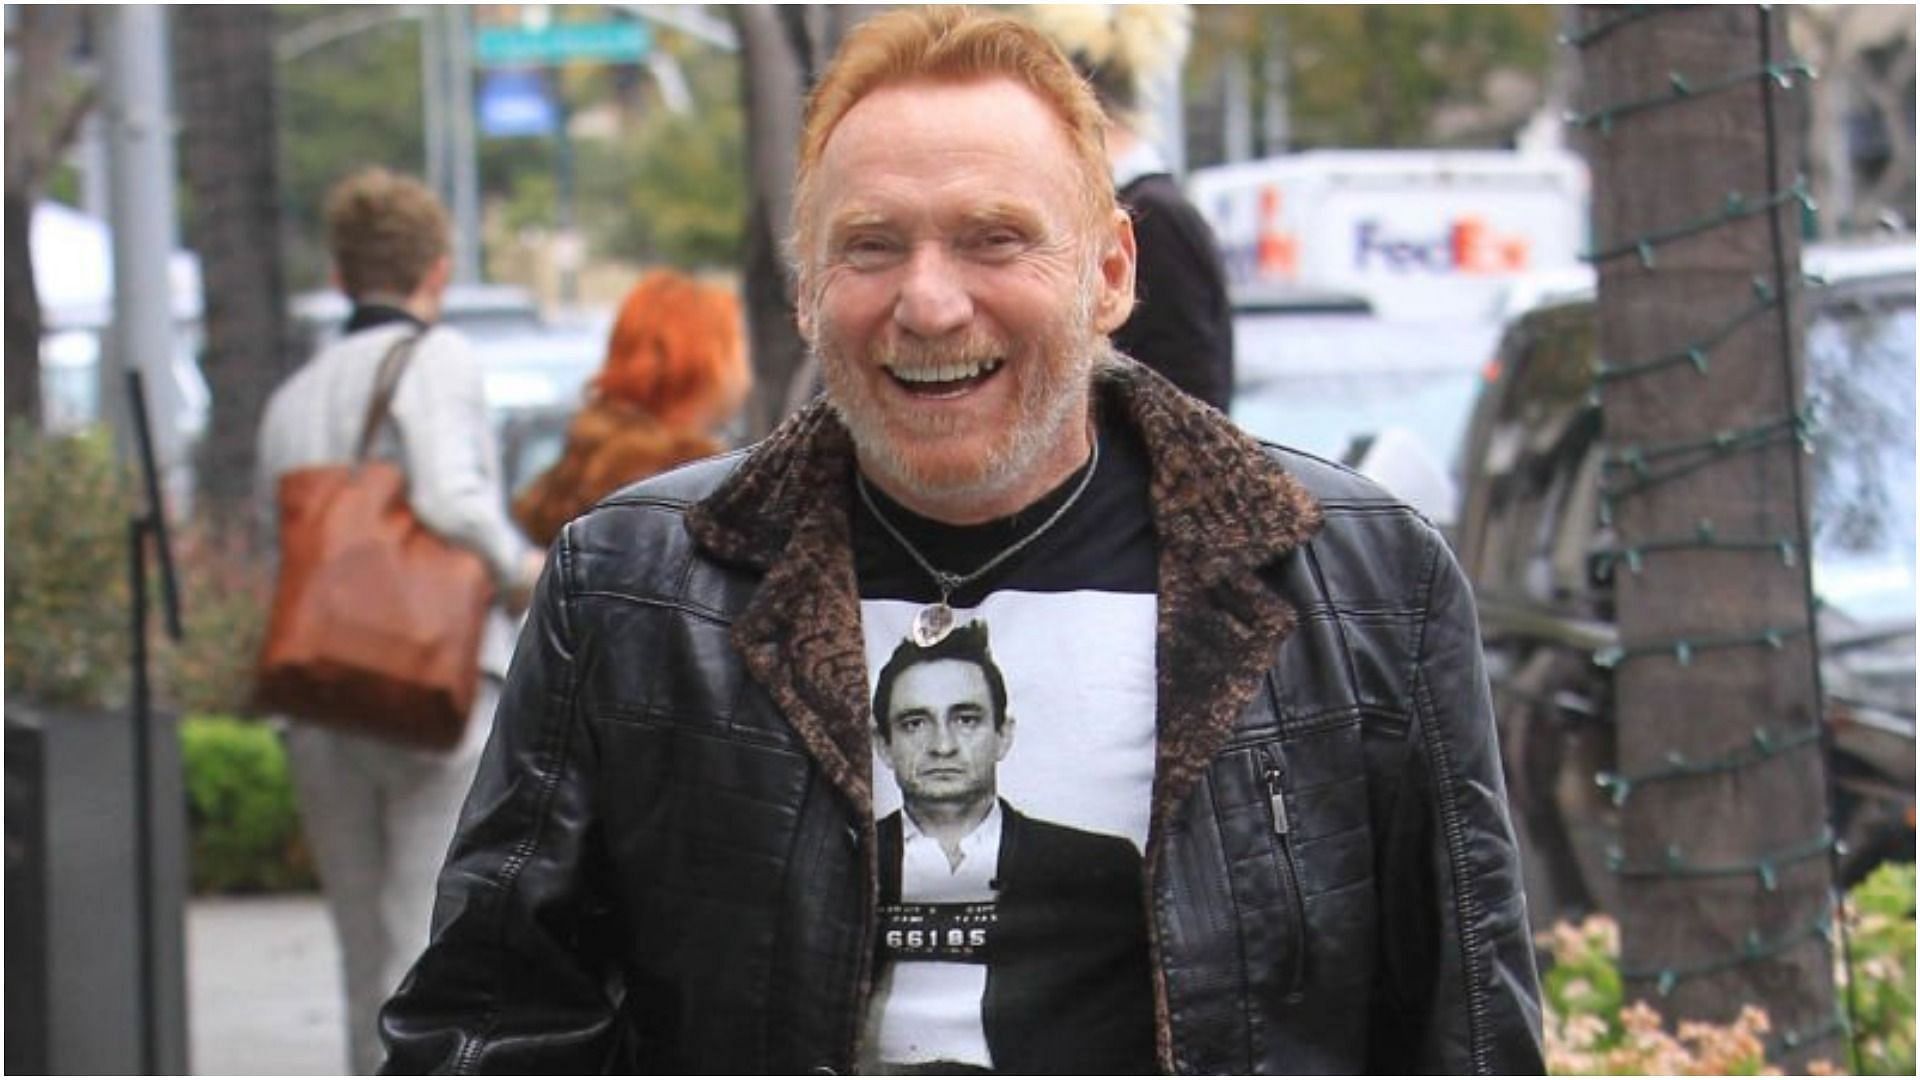 Danny Bonaduce is taking a medical leave from his radio show (Image via SMXRF/Getty Images)